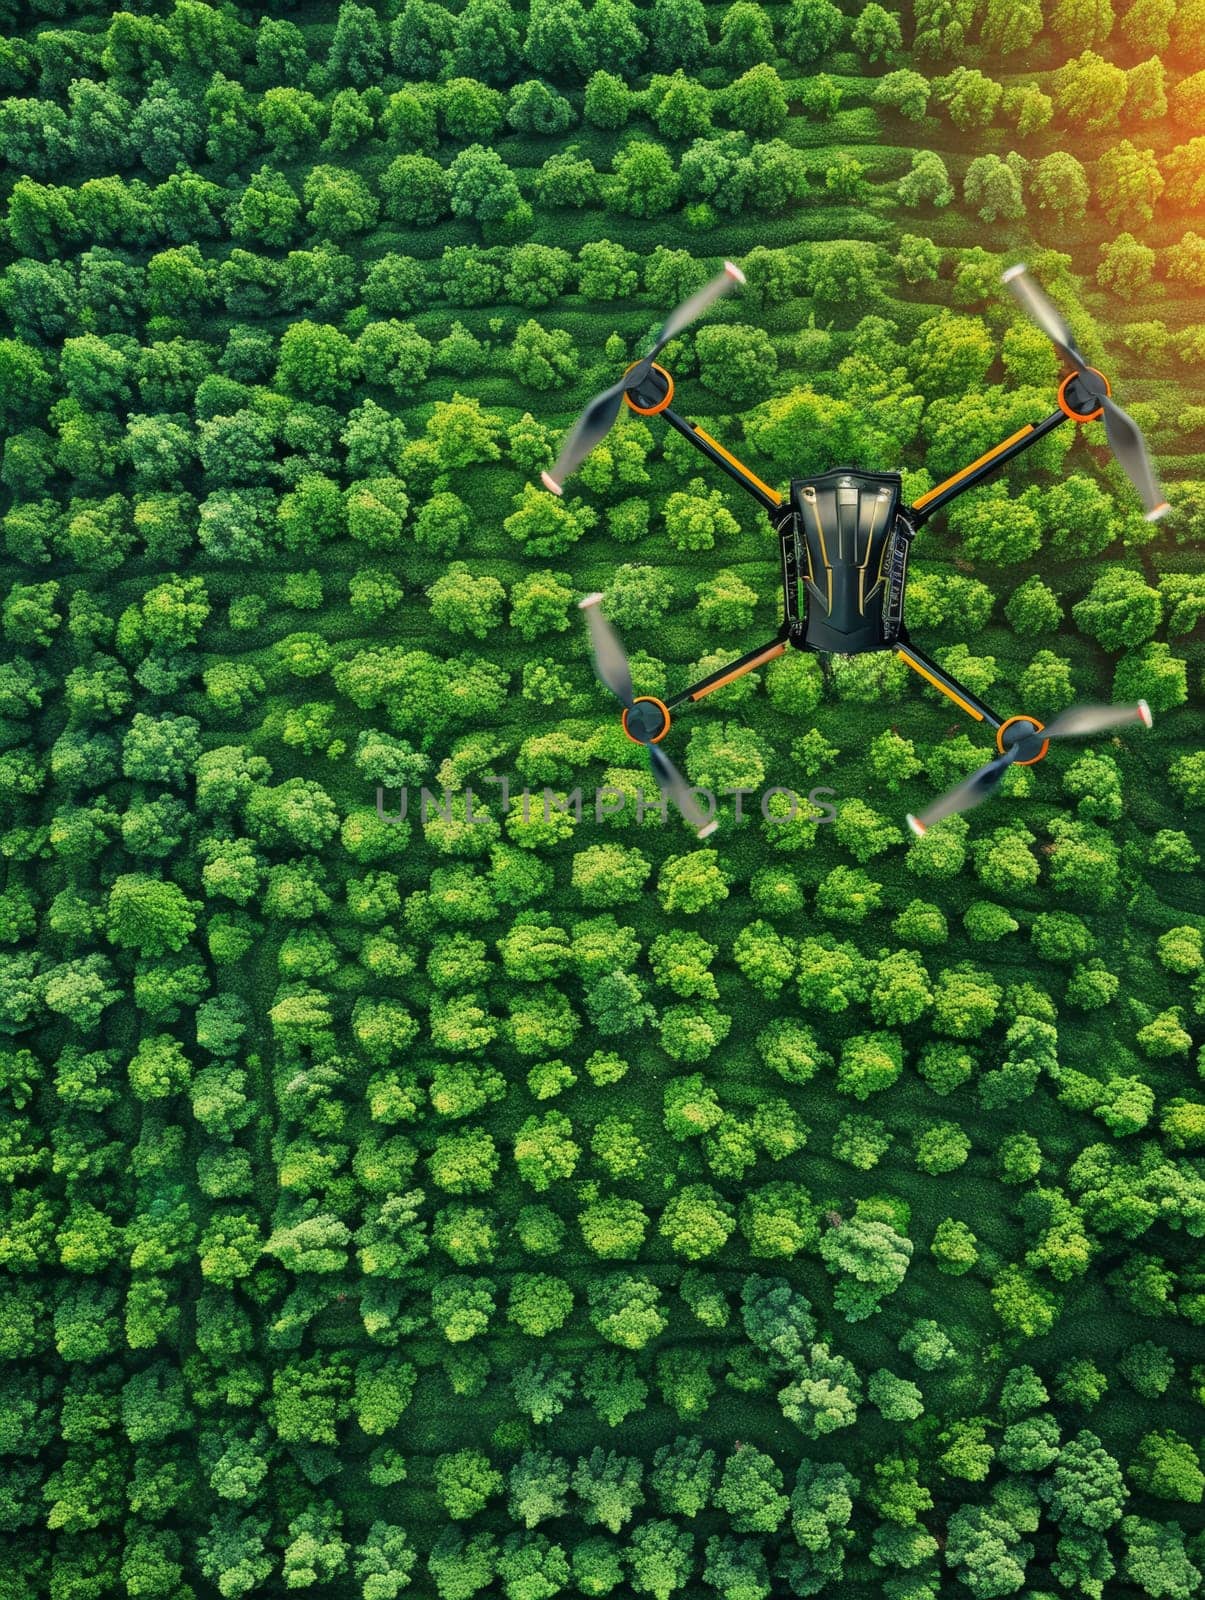 An aerial perspective shows a drone hovering above a dense green forest, with the rich canopy stretching out beneath. This highlights the role of drones in forest management and conservation efforts.. by sfinks